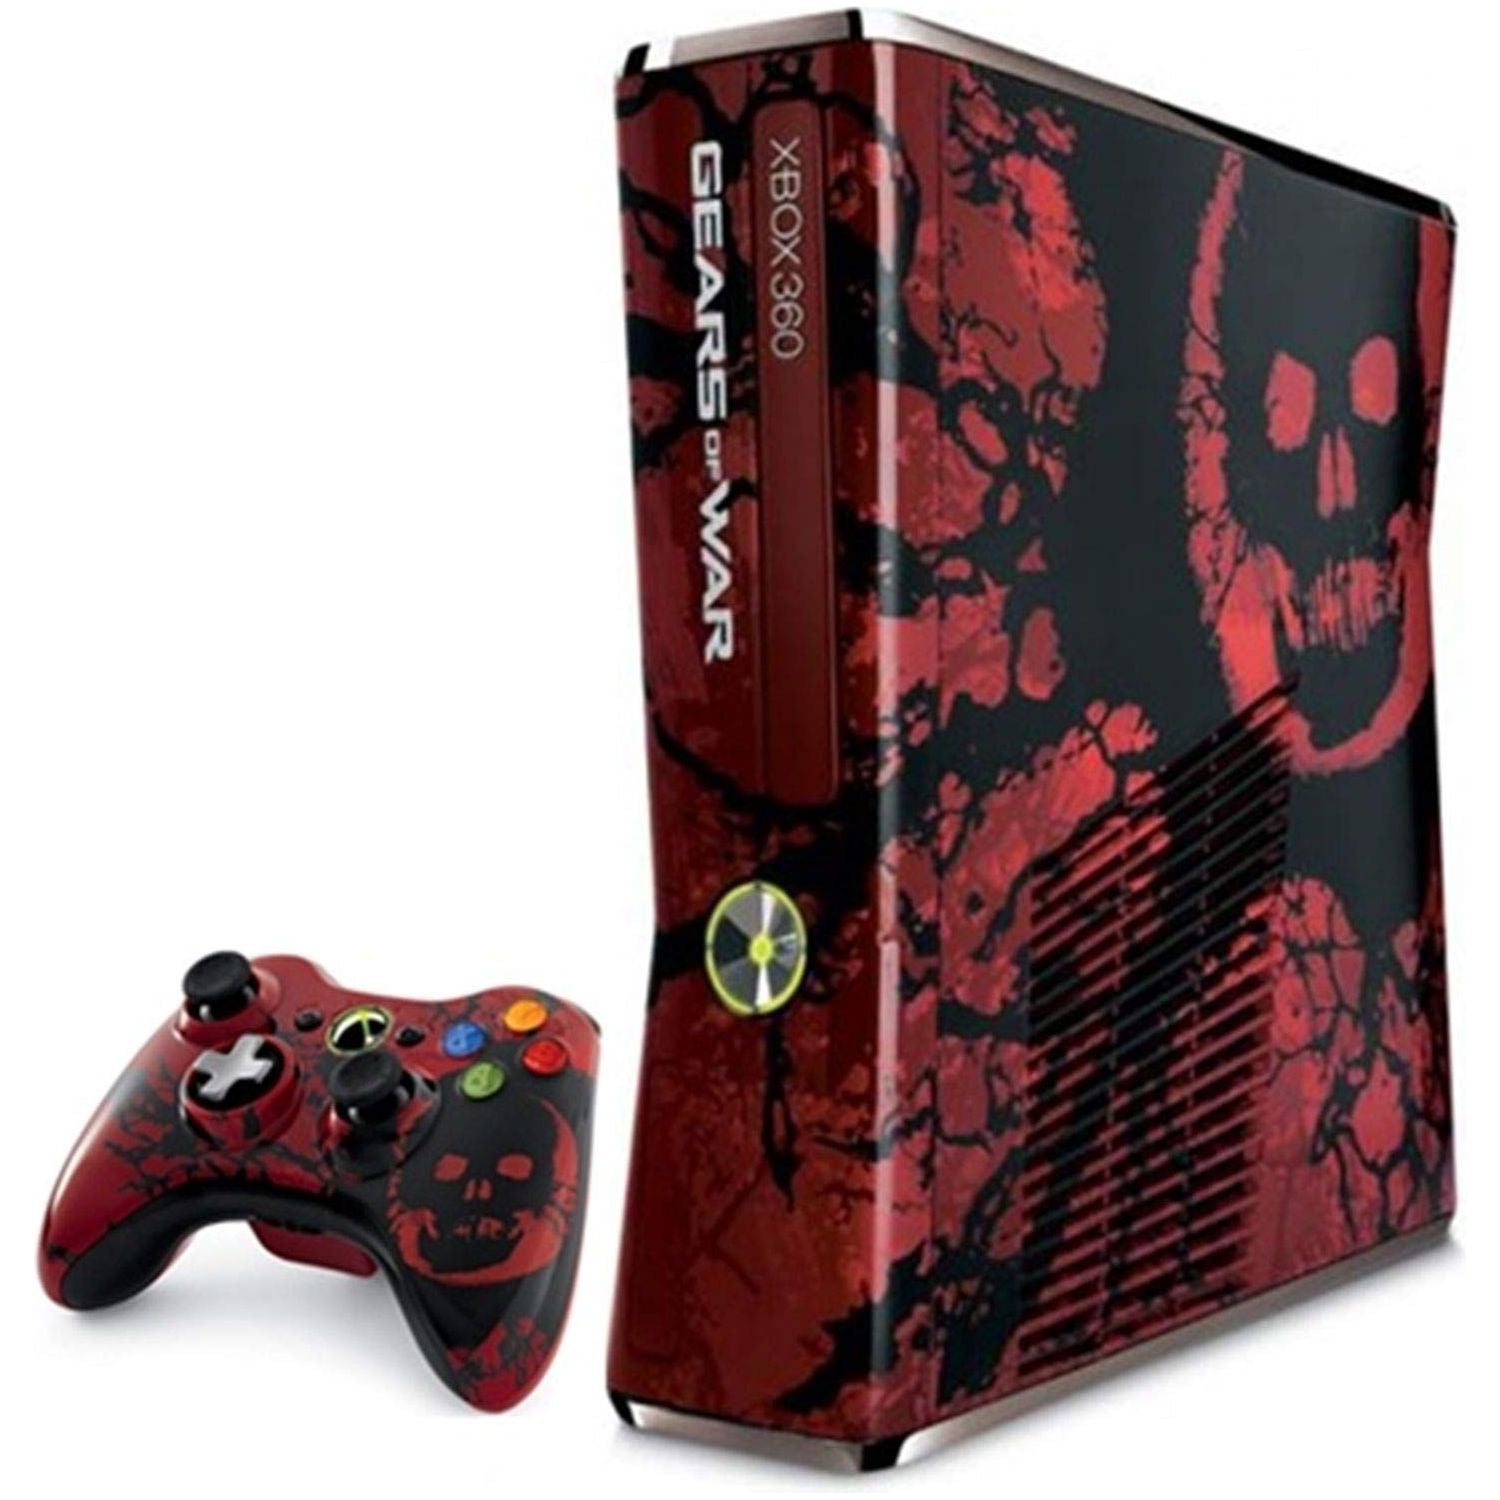 XBOX 360 Slim System Gears of War 3 Edition with Matching Controller